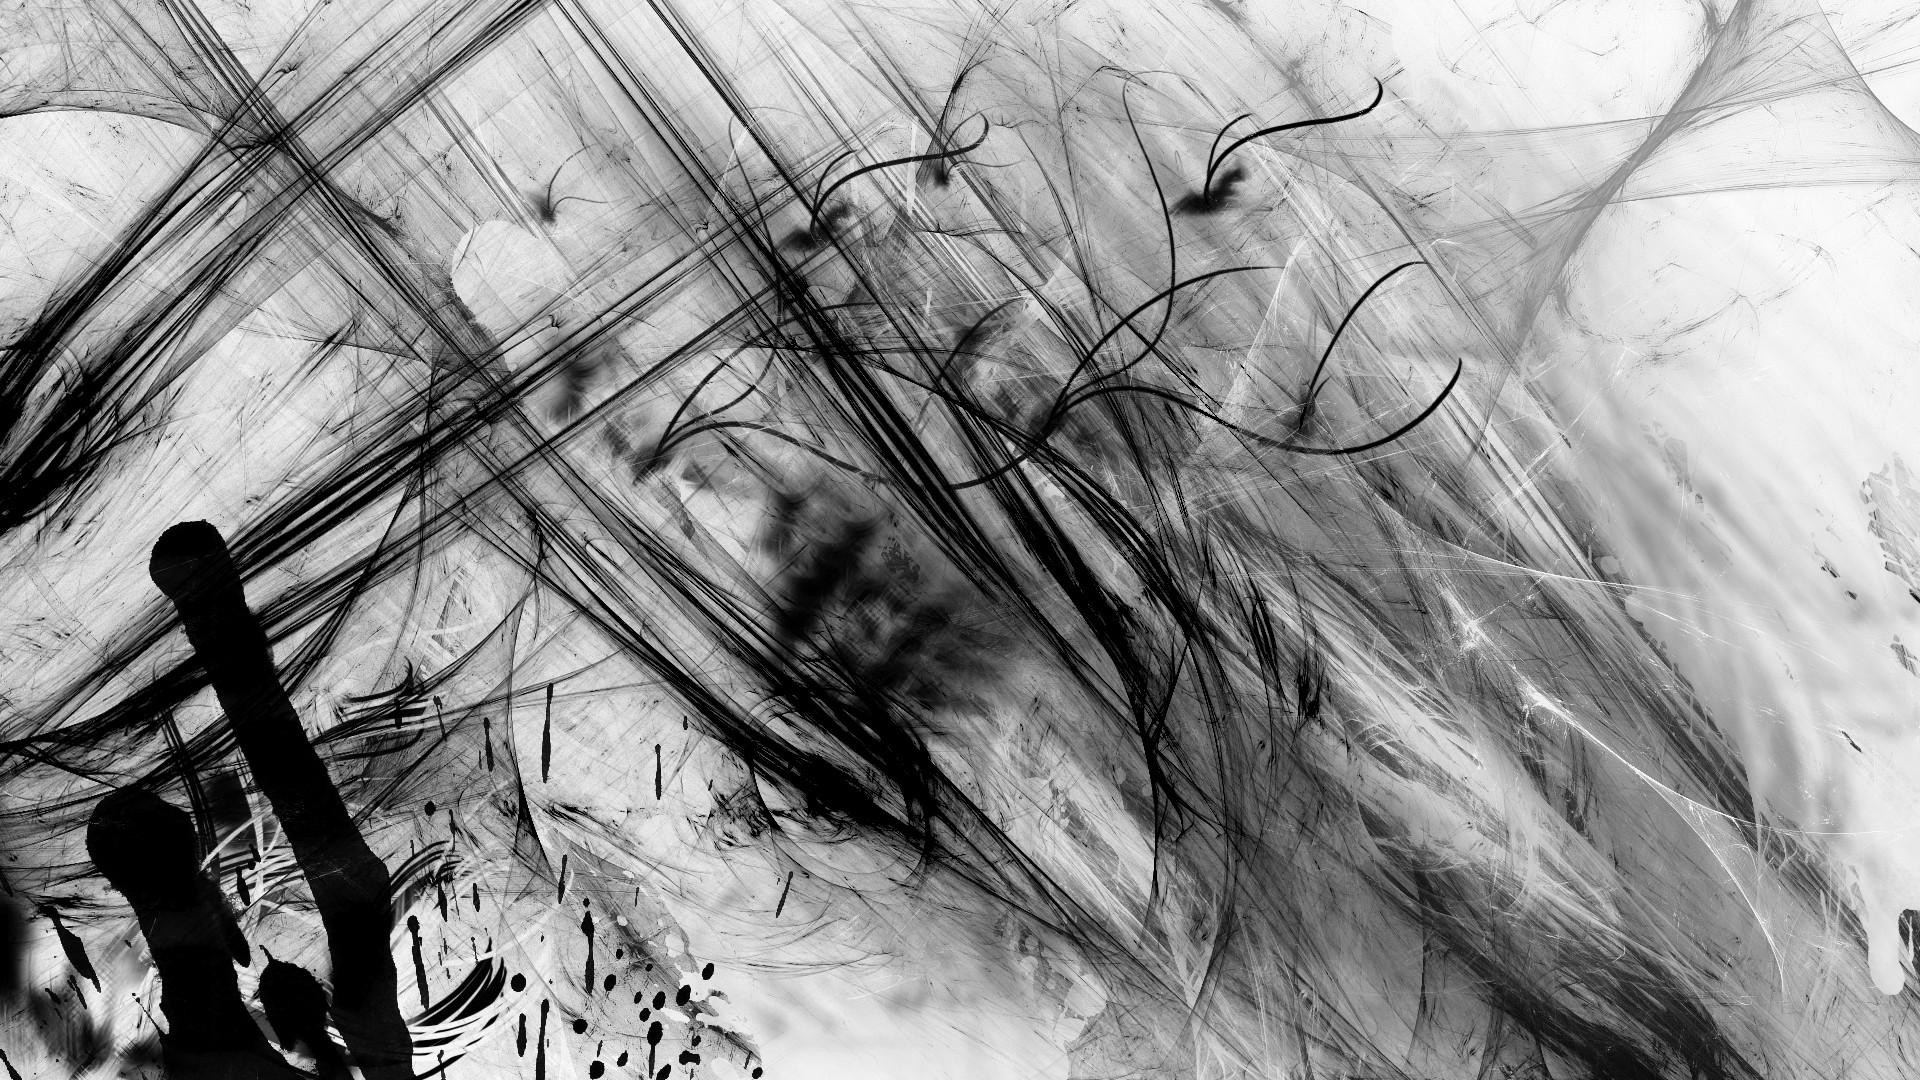 Abstract Black White Spray Paint Contrast Wallpaper - Hd Abstract Black And White - HD Wallpaper 